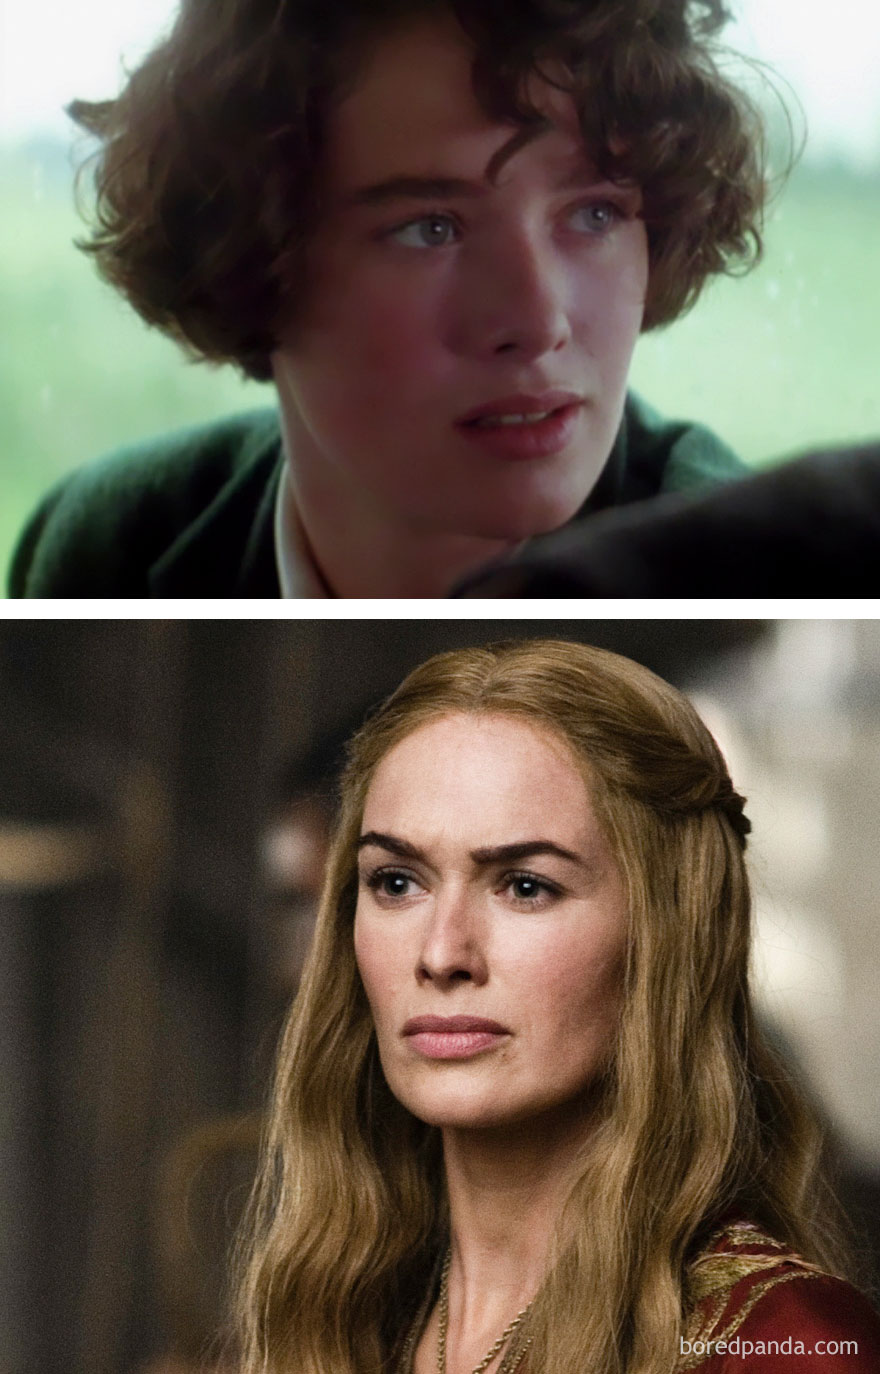 Lena Headey As Young Mary (In 1992's Waterland) And As Cersei Lannister (In GoT)